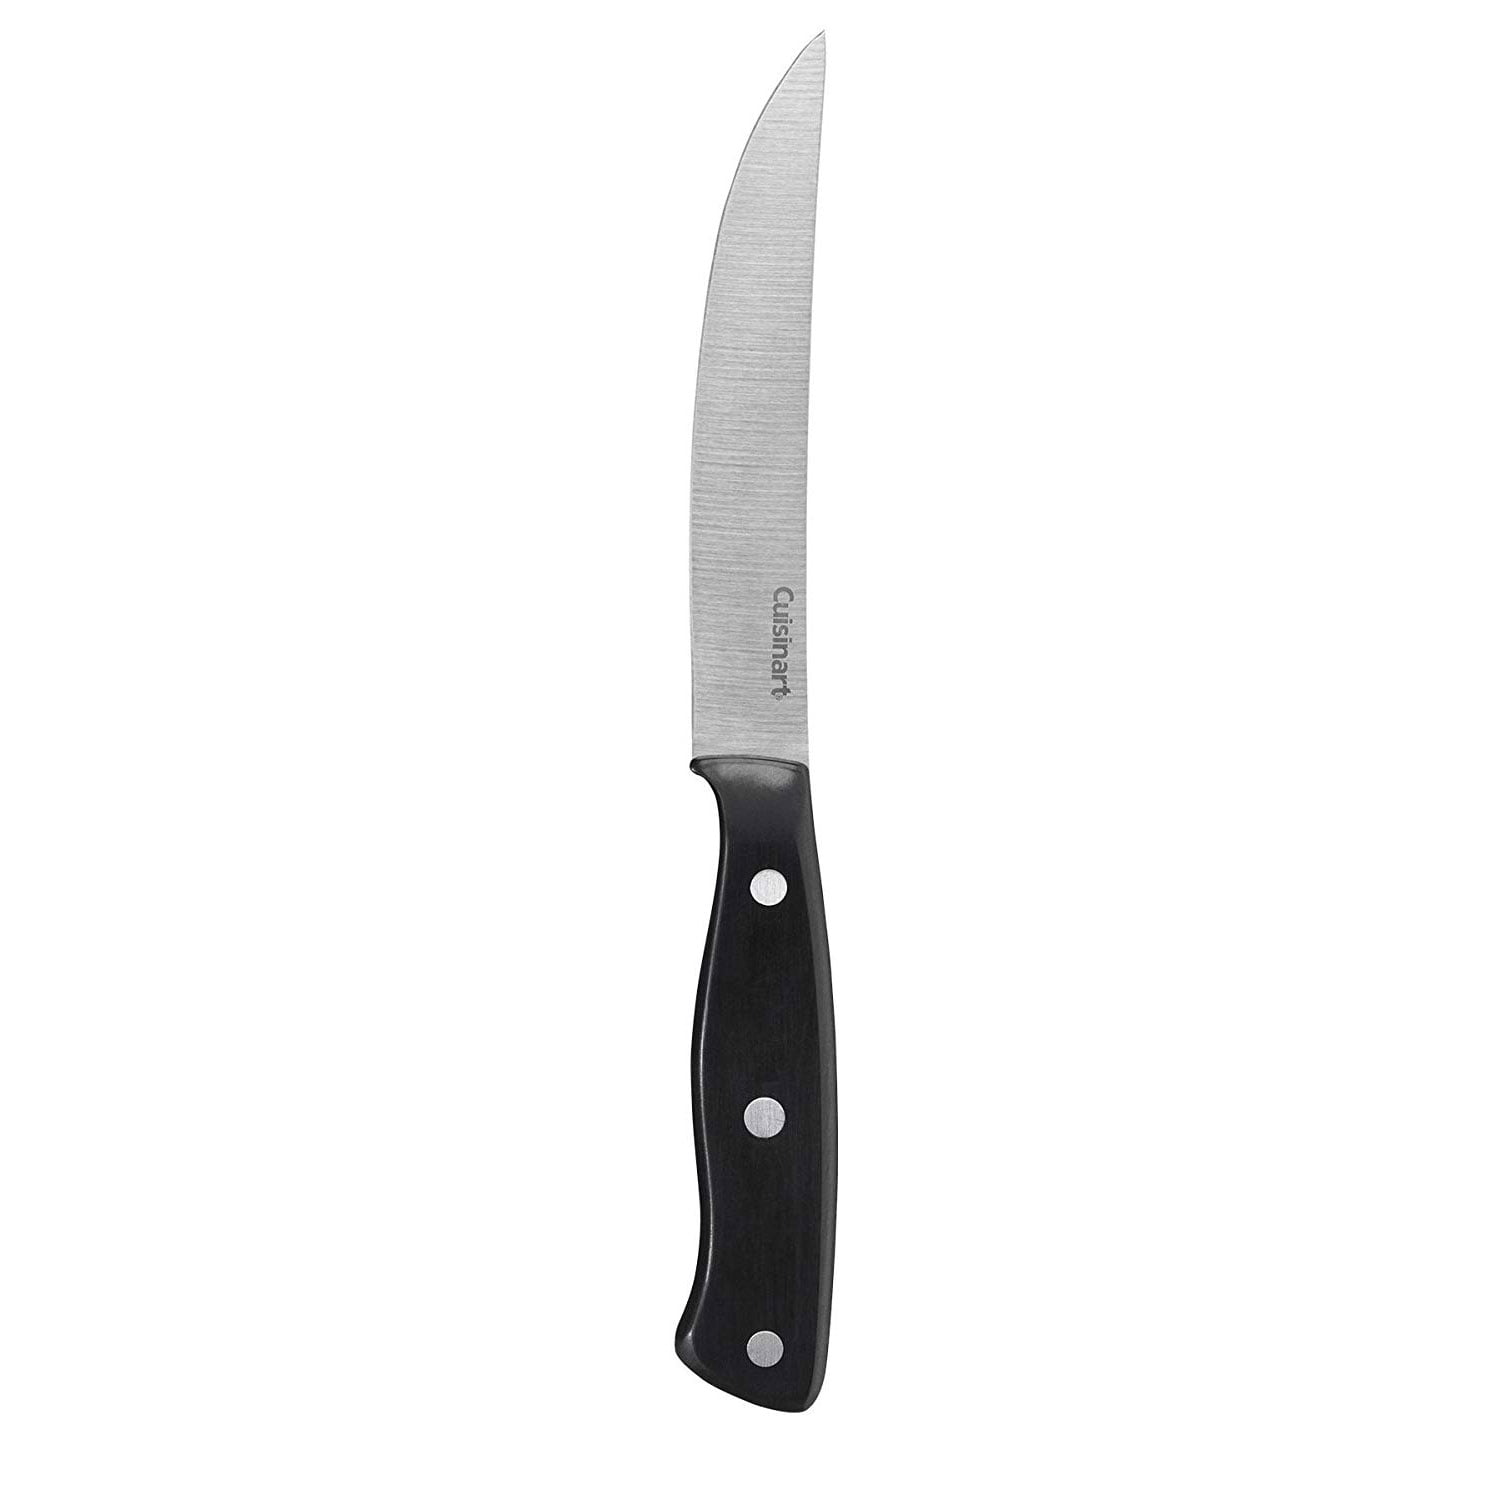 Best Buy: Cuisinart 6-Piece Knife Set Stainless C77SS2-6PPC7